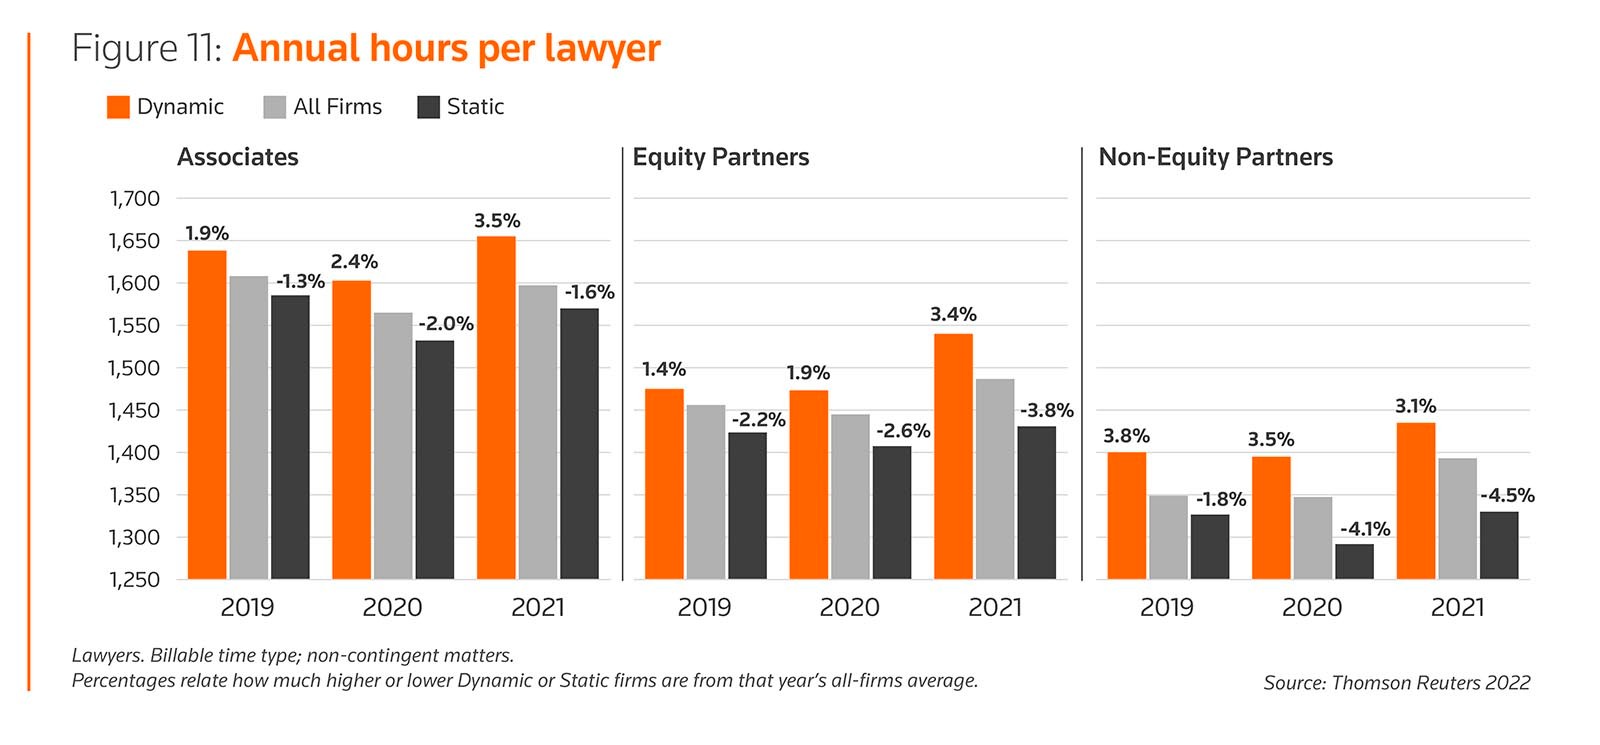 Figure 11: Annual hours per lawyer 